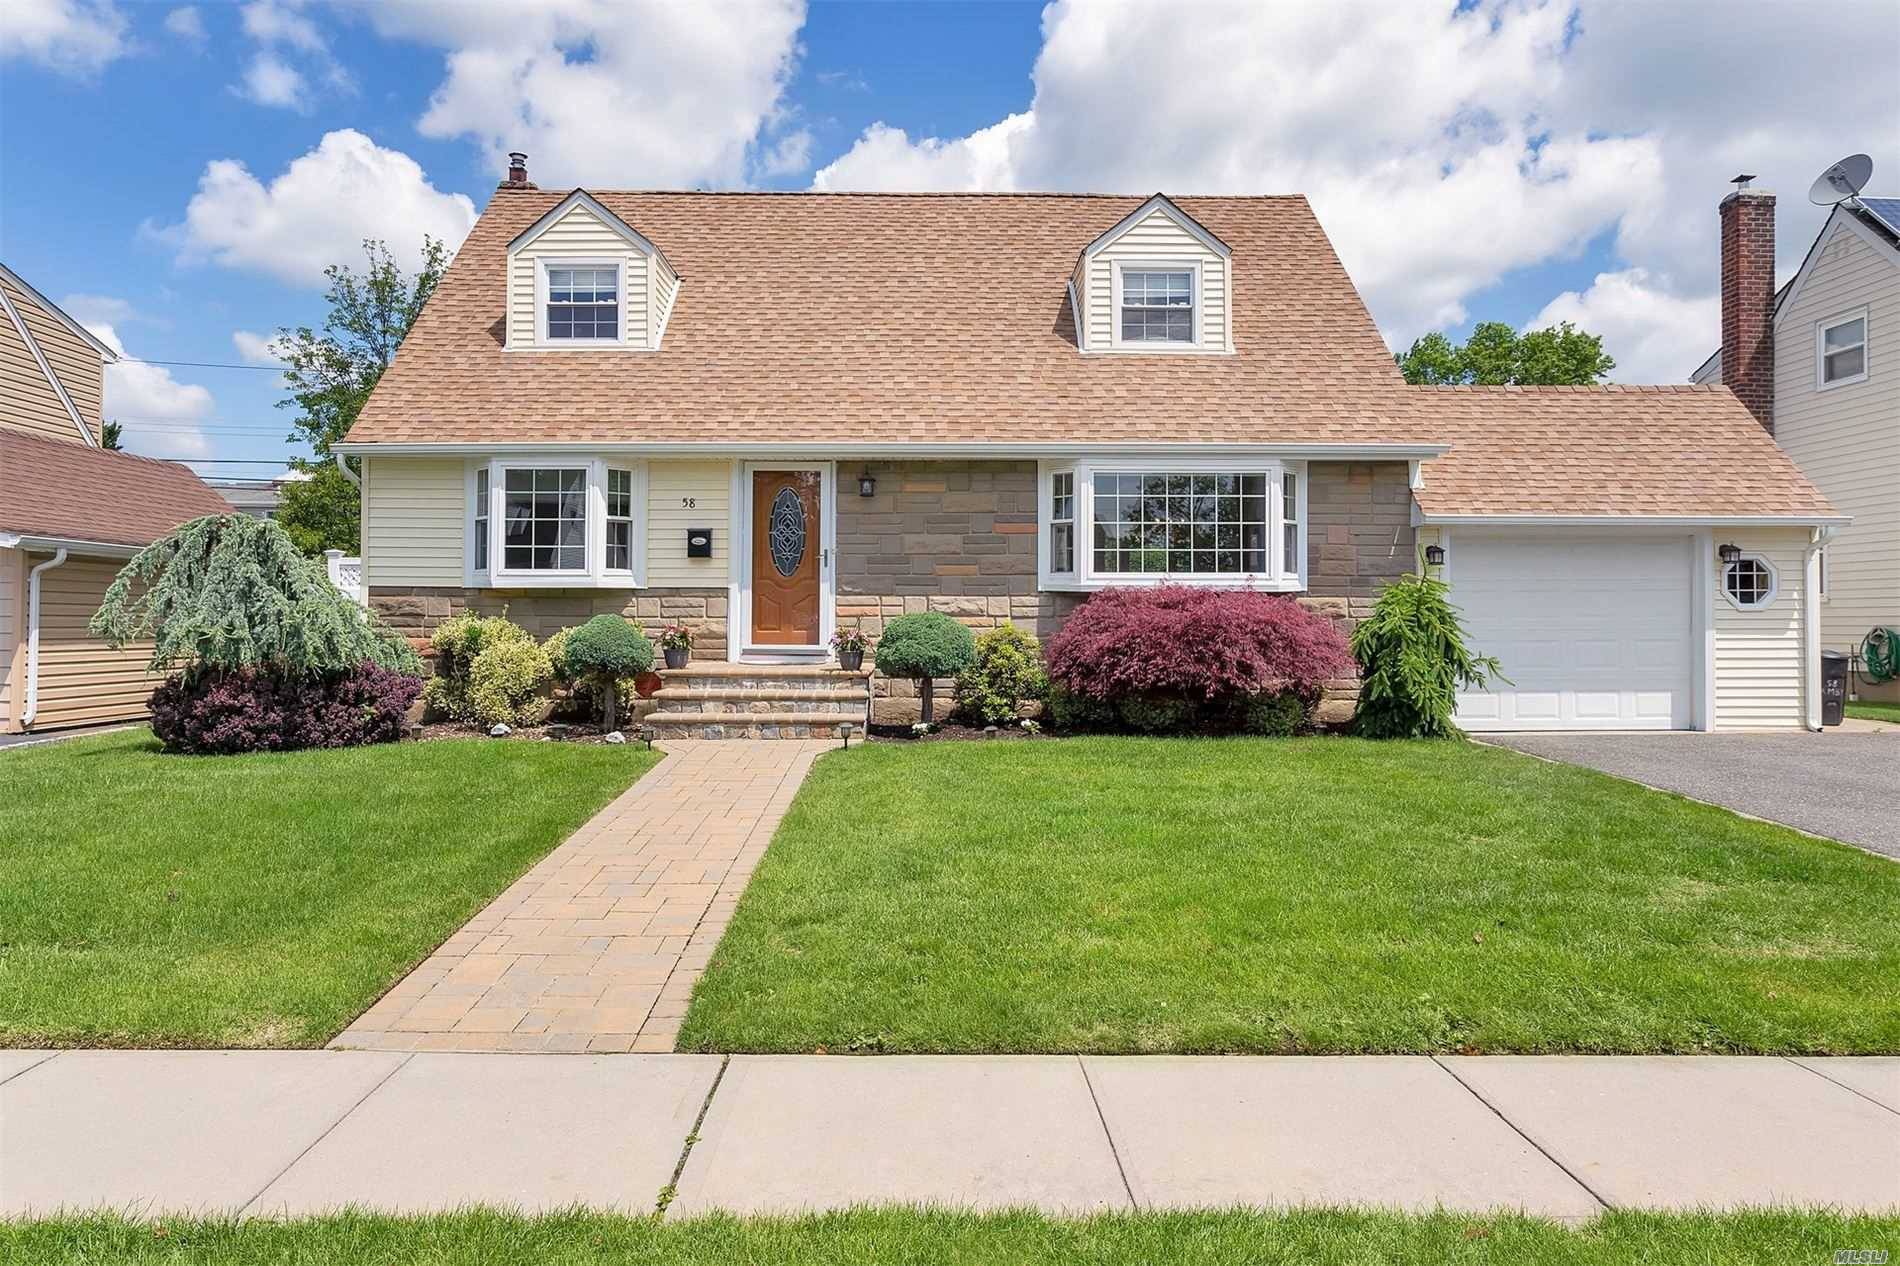 This Diamond 4 Bedroom 2 Full Bath Cape Is The Perfect Home To Move Right In To.